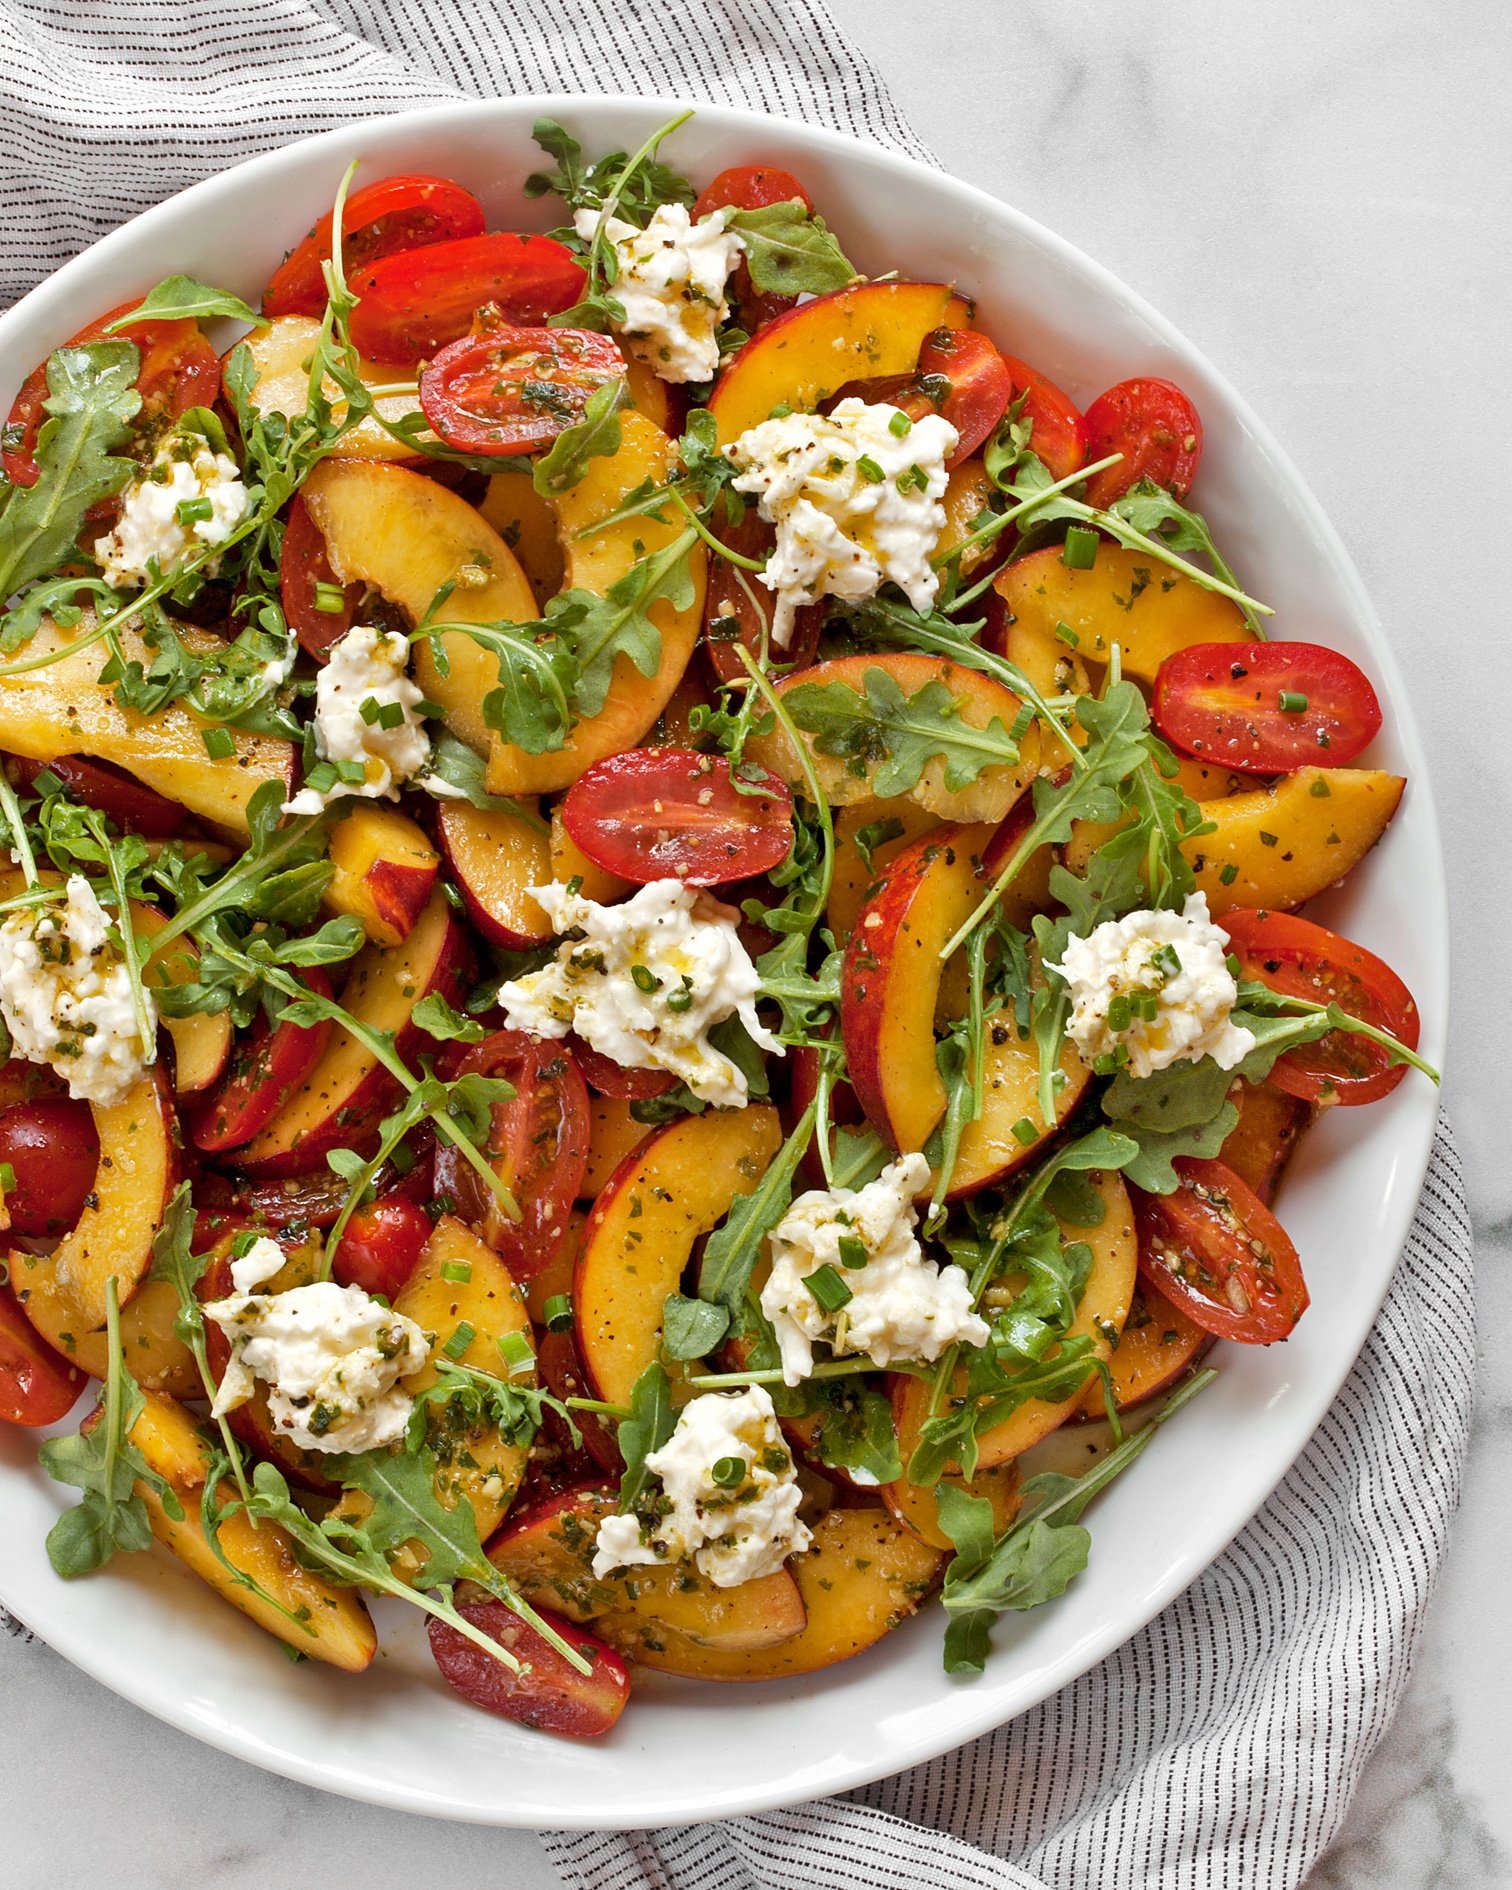 Peach burrata salad with tomatoes on a plate.